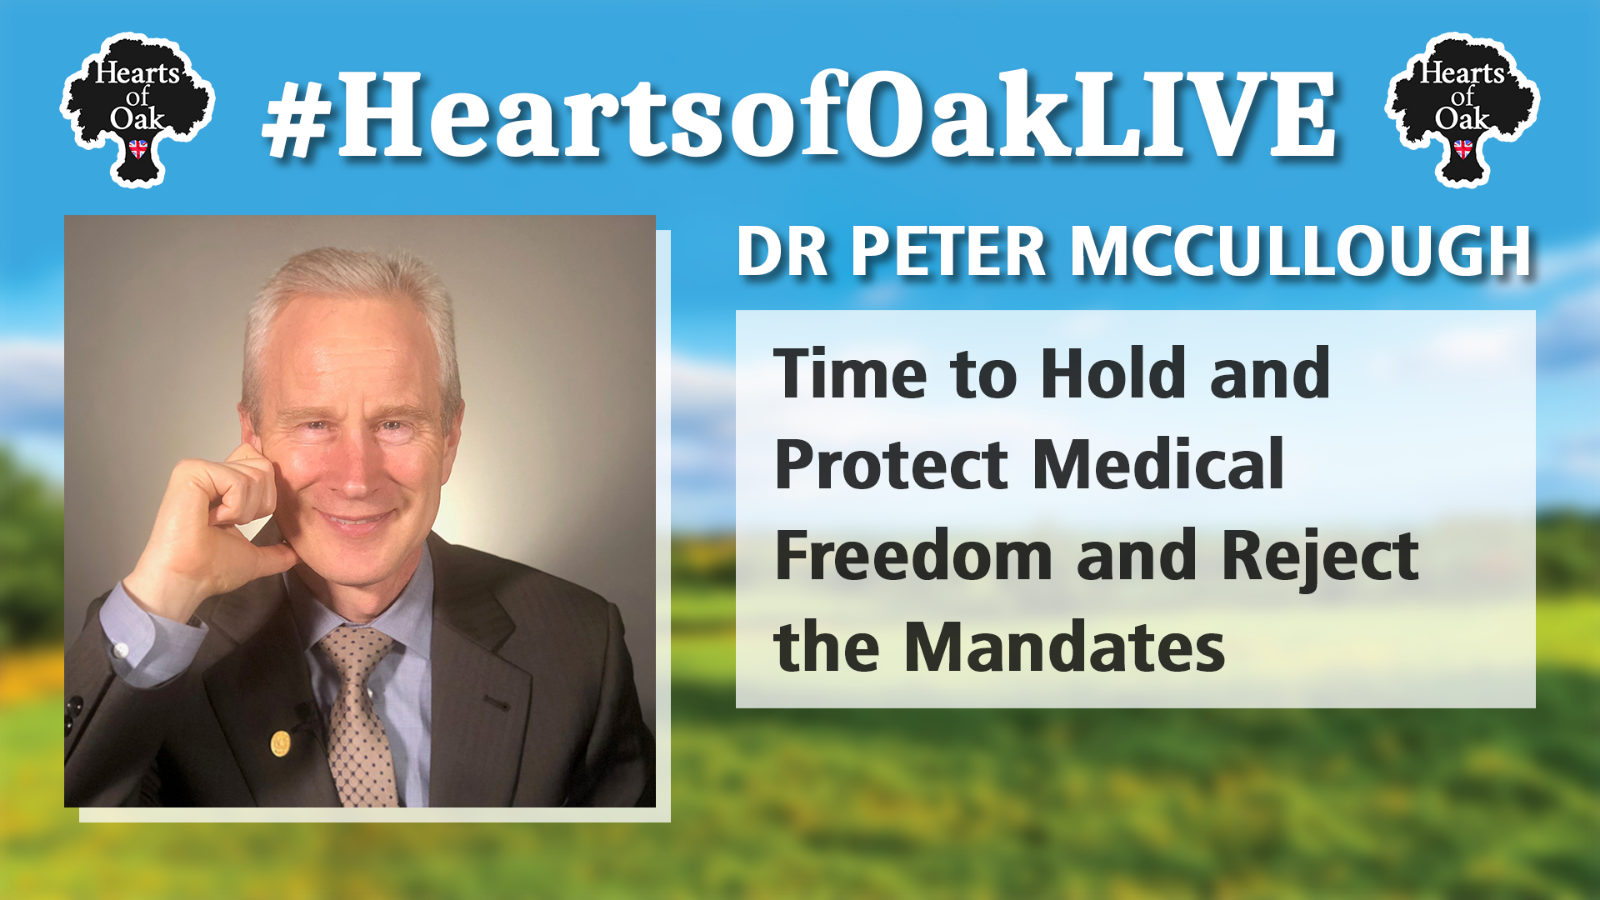 Dr Peter McCullough – Time to Hold and Protect Medical Freedom and Reject the Mandates